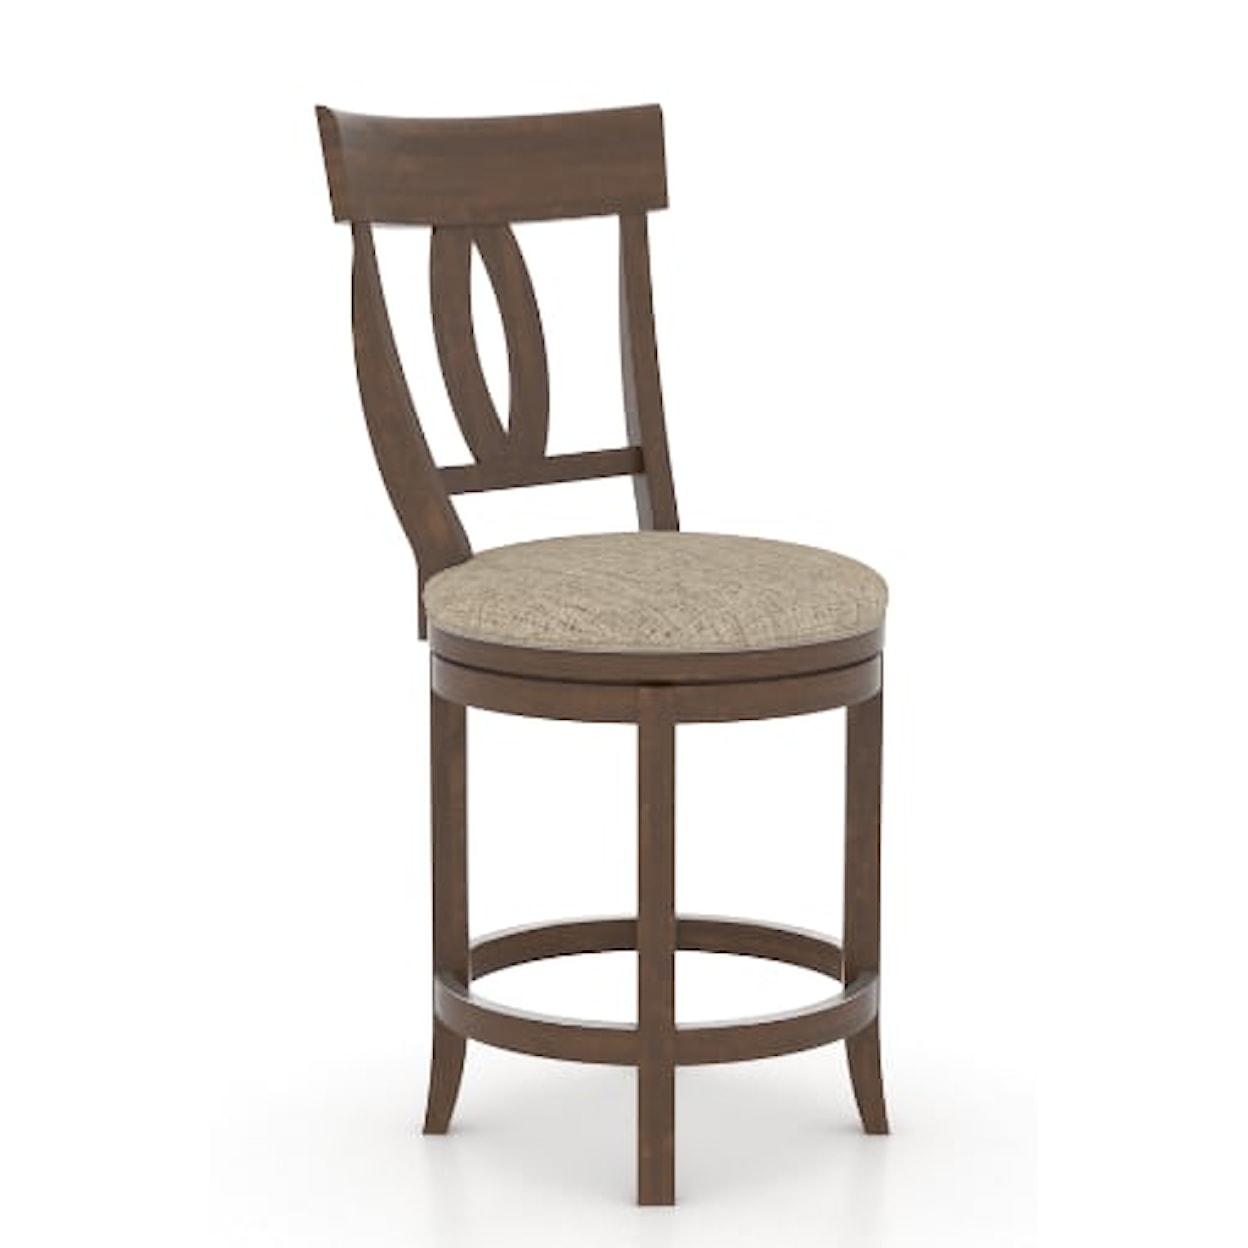 Canadel Canadel Upholstered Swivel Stool